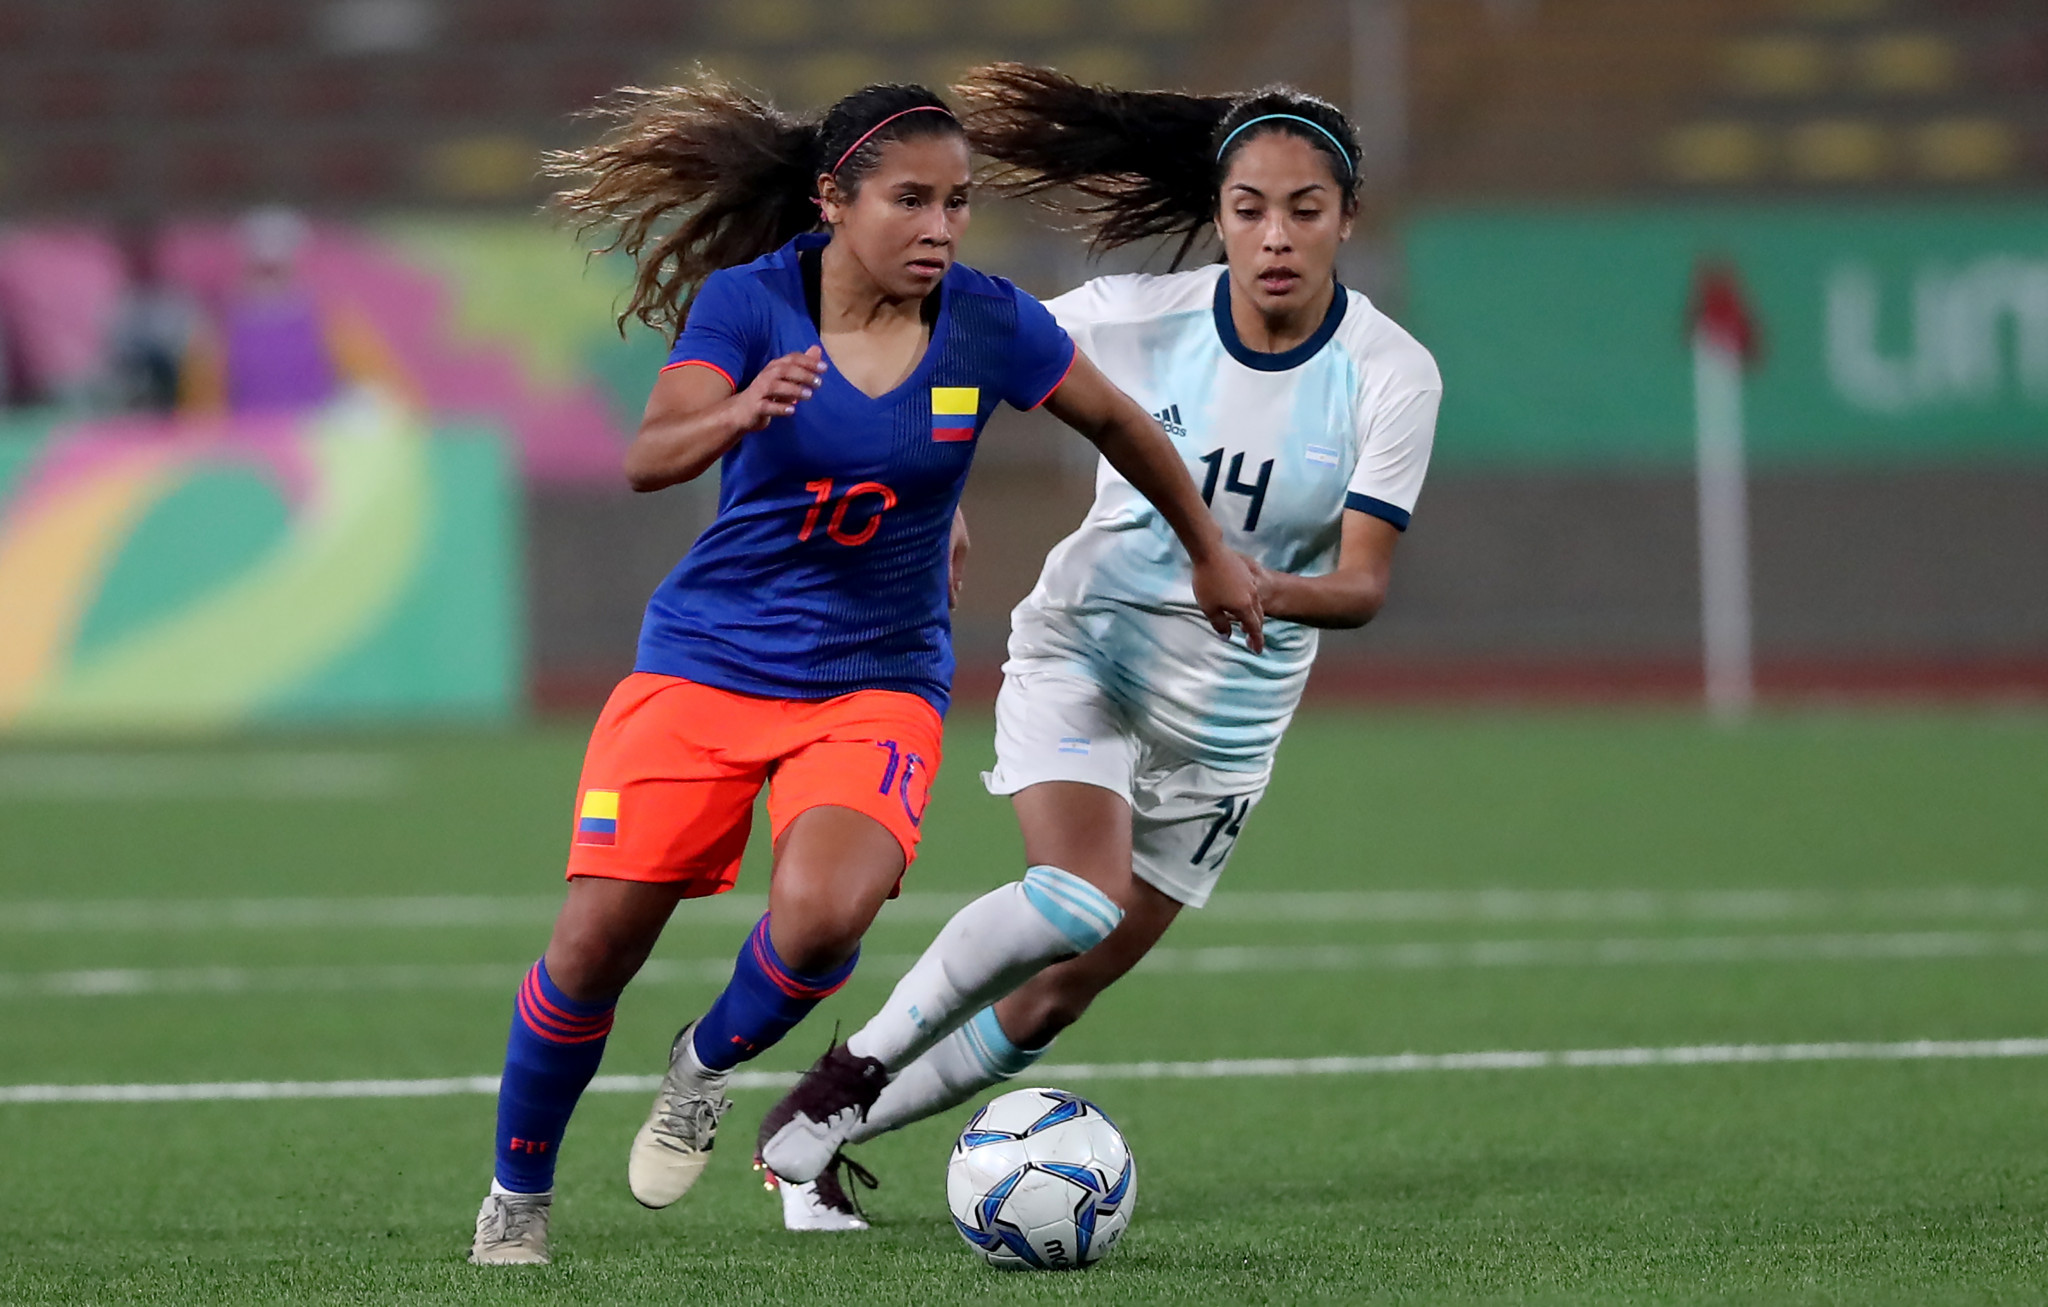 Colombia defeated Argentina to win gold in the women's football competition at the Lima 2019 Pan American Games ©Getty Images